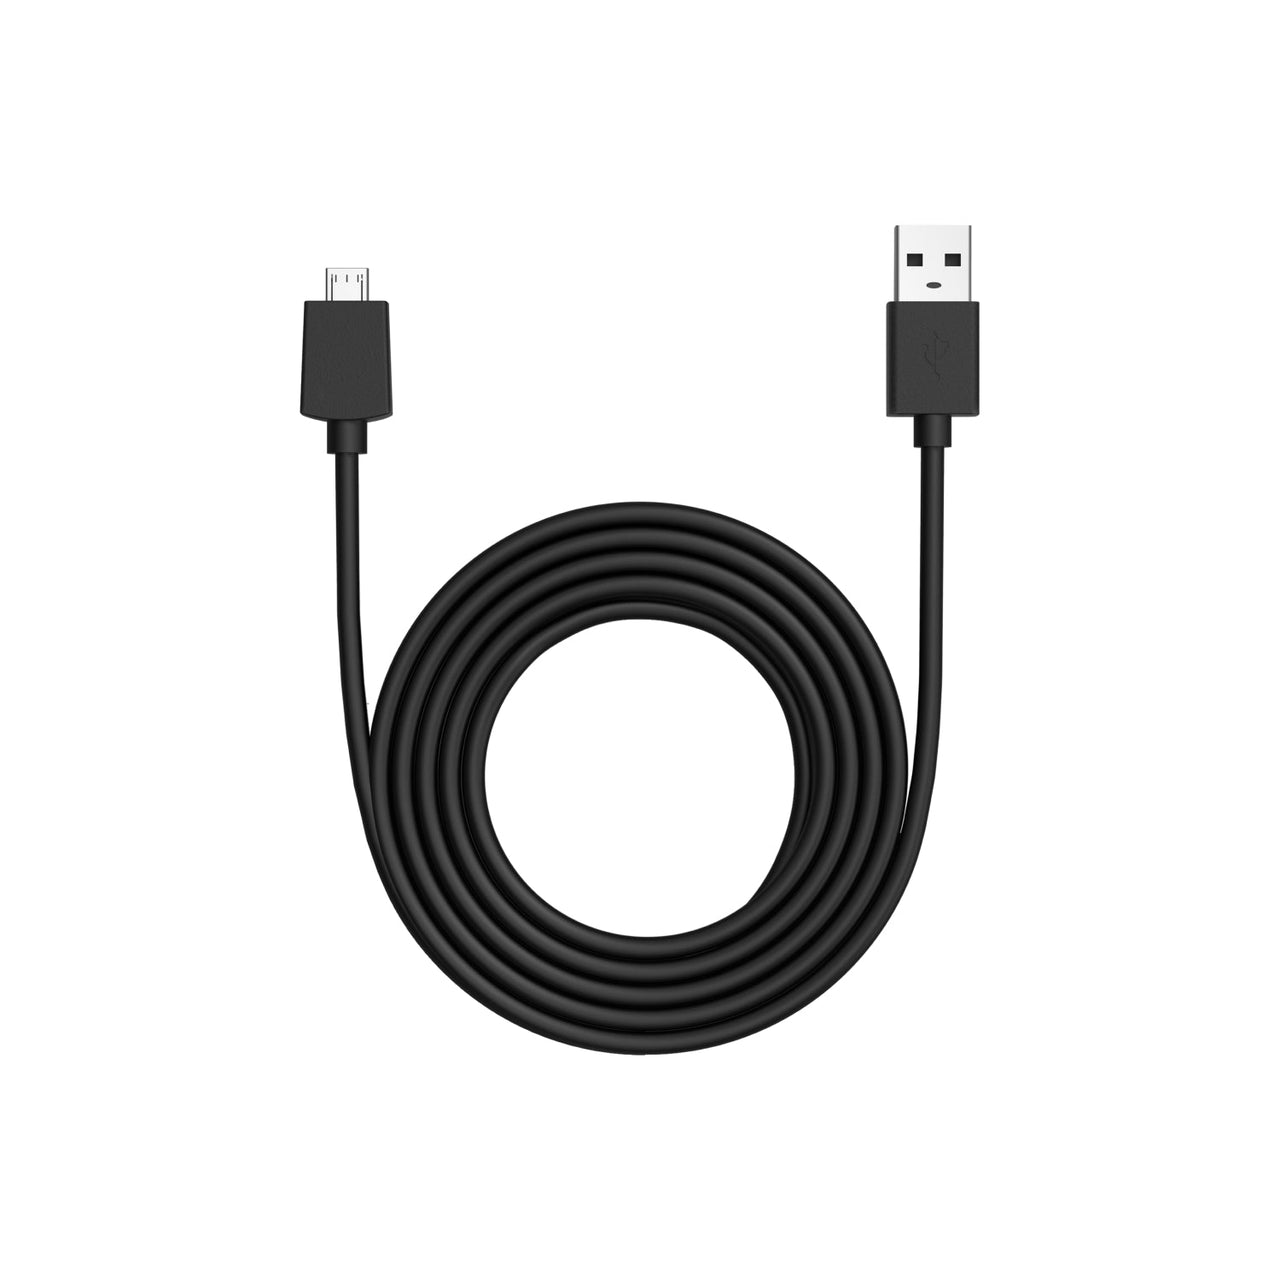 products/ring_indoorcamera_cable_BLK_slate1.jpg